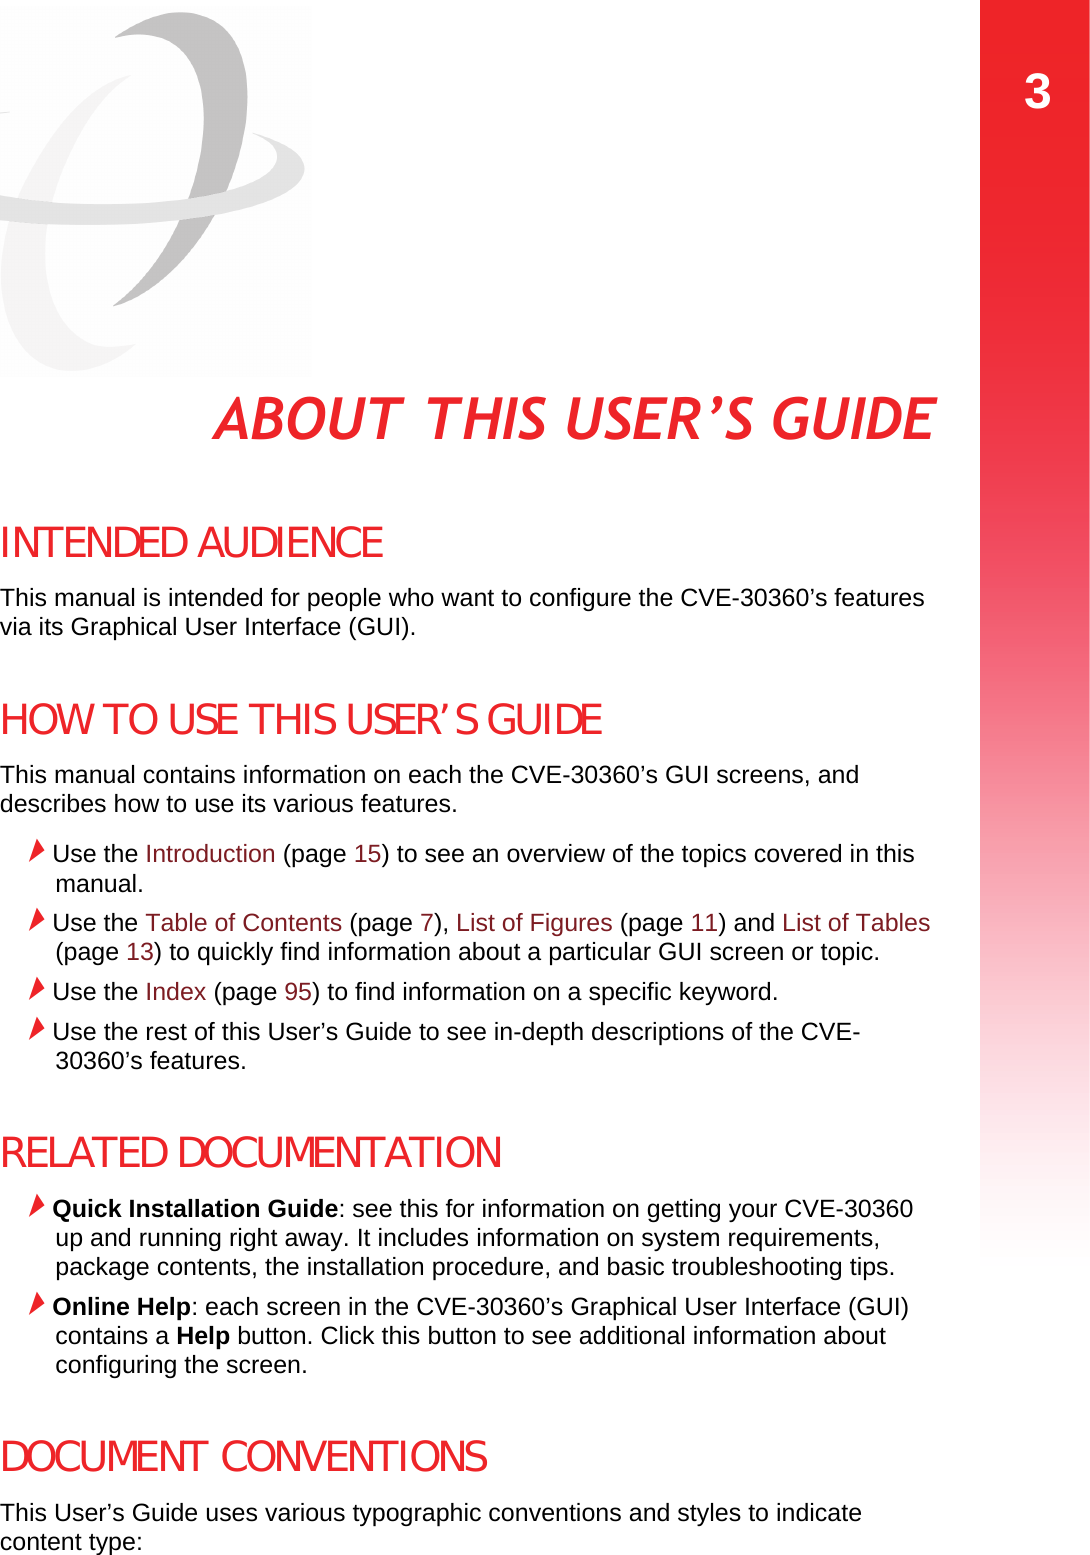 3ABOUT THIS USER’S GUIDEABOUT THIS USER’S GUIDEINTENDED AUDIENCEThis manual is intended for people who want to configure the CVE-30360’s features via its Graphical User Interface (GUI). HOW TO USE THIS USER’S GUIDEThis manual contains information on each the CVE-30360’s GUI screens, and describes how to use its various features.Use the Introduction (page 15) to see an overview of the topics covered in this manual.Use the Table of Contents (page 7), List of Figures (page 11) and List of Tables (page 13) to quickly find information about a particular GUI screen or topic.Use the Index (page 95) to find information on a specific keyword.Use the rest of this User’s Guide to see in-depth descriptions of the CVE-30360’s features.RELATED DOCUMENTATIONQuick Installation Guide: see this for information on getting your CVE-30360 up and running right away. It includes information on system requirements, package contents, the installation procedure, and basic troubleshooting tips.Online Help: each screen in the CVE-30360’s Graphical User Interface (GUI) contains a Help button. Click this button to see additional information about configuring the screen.DOCUMENT CONVENTIONSThis User’s Guide uses various typographic conventions and styles to indicate content type: